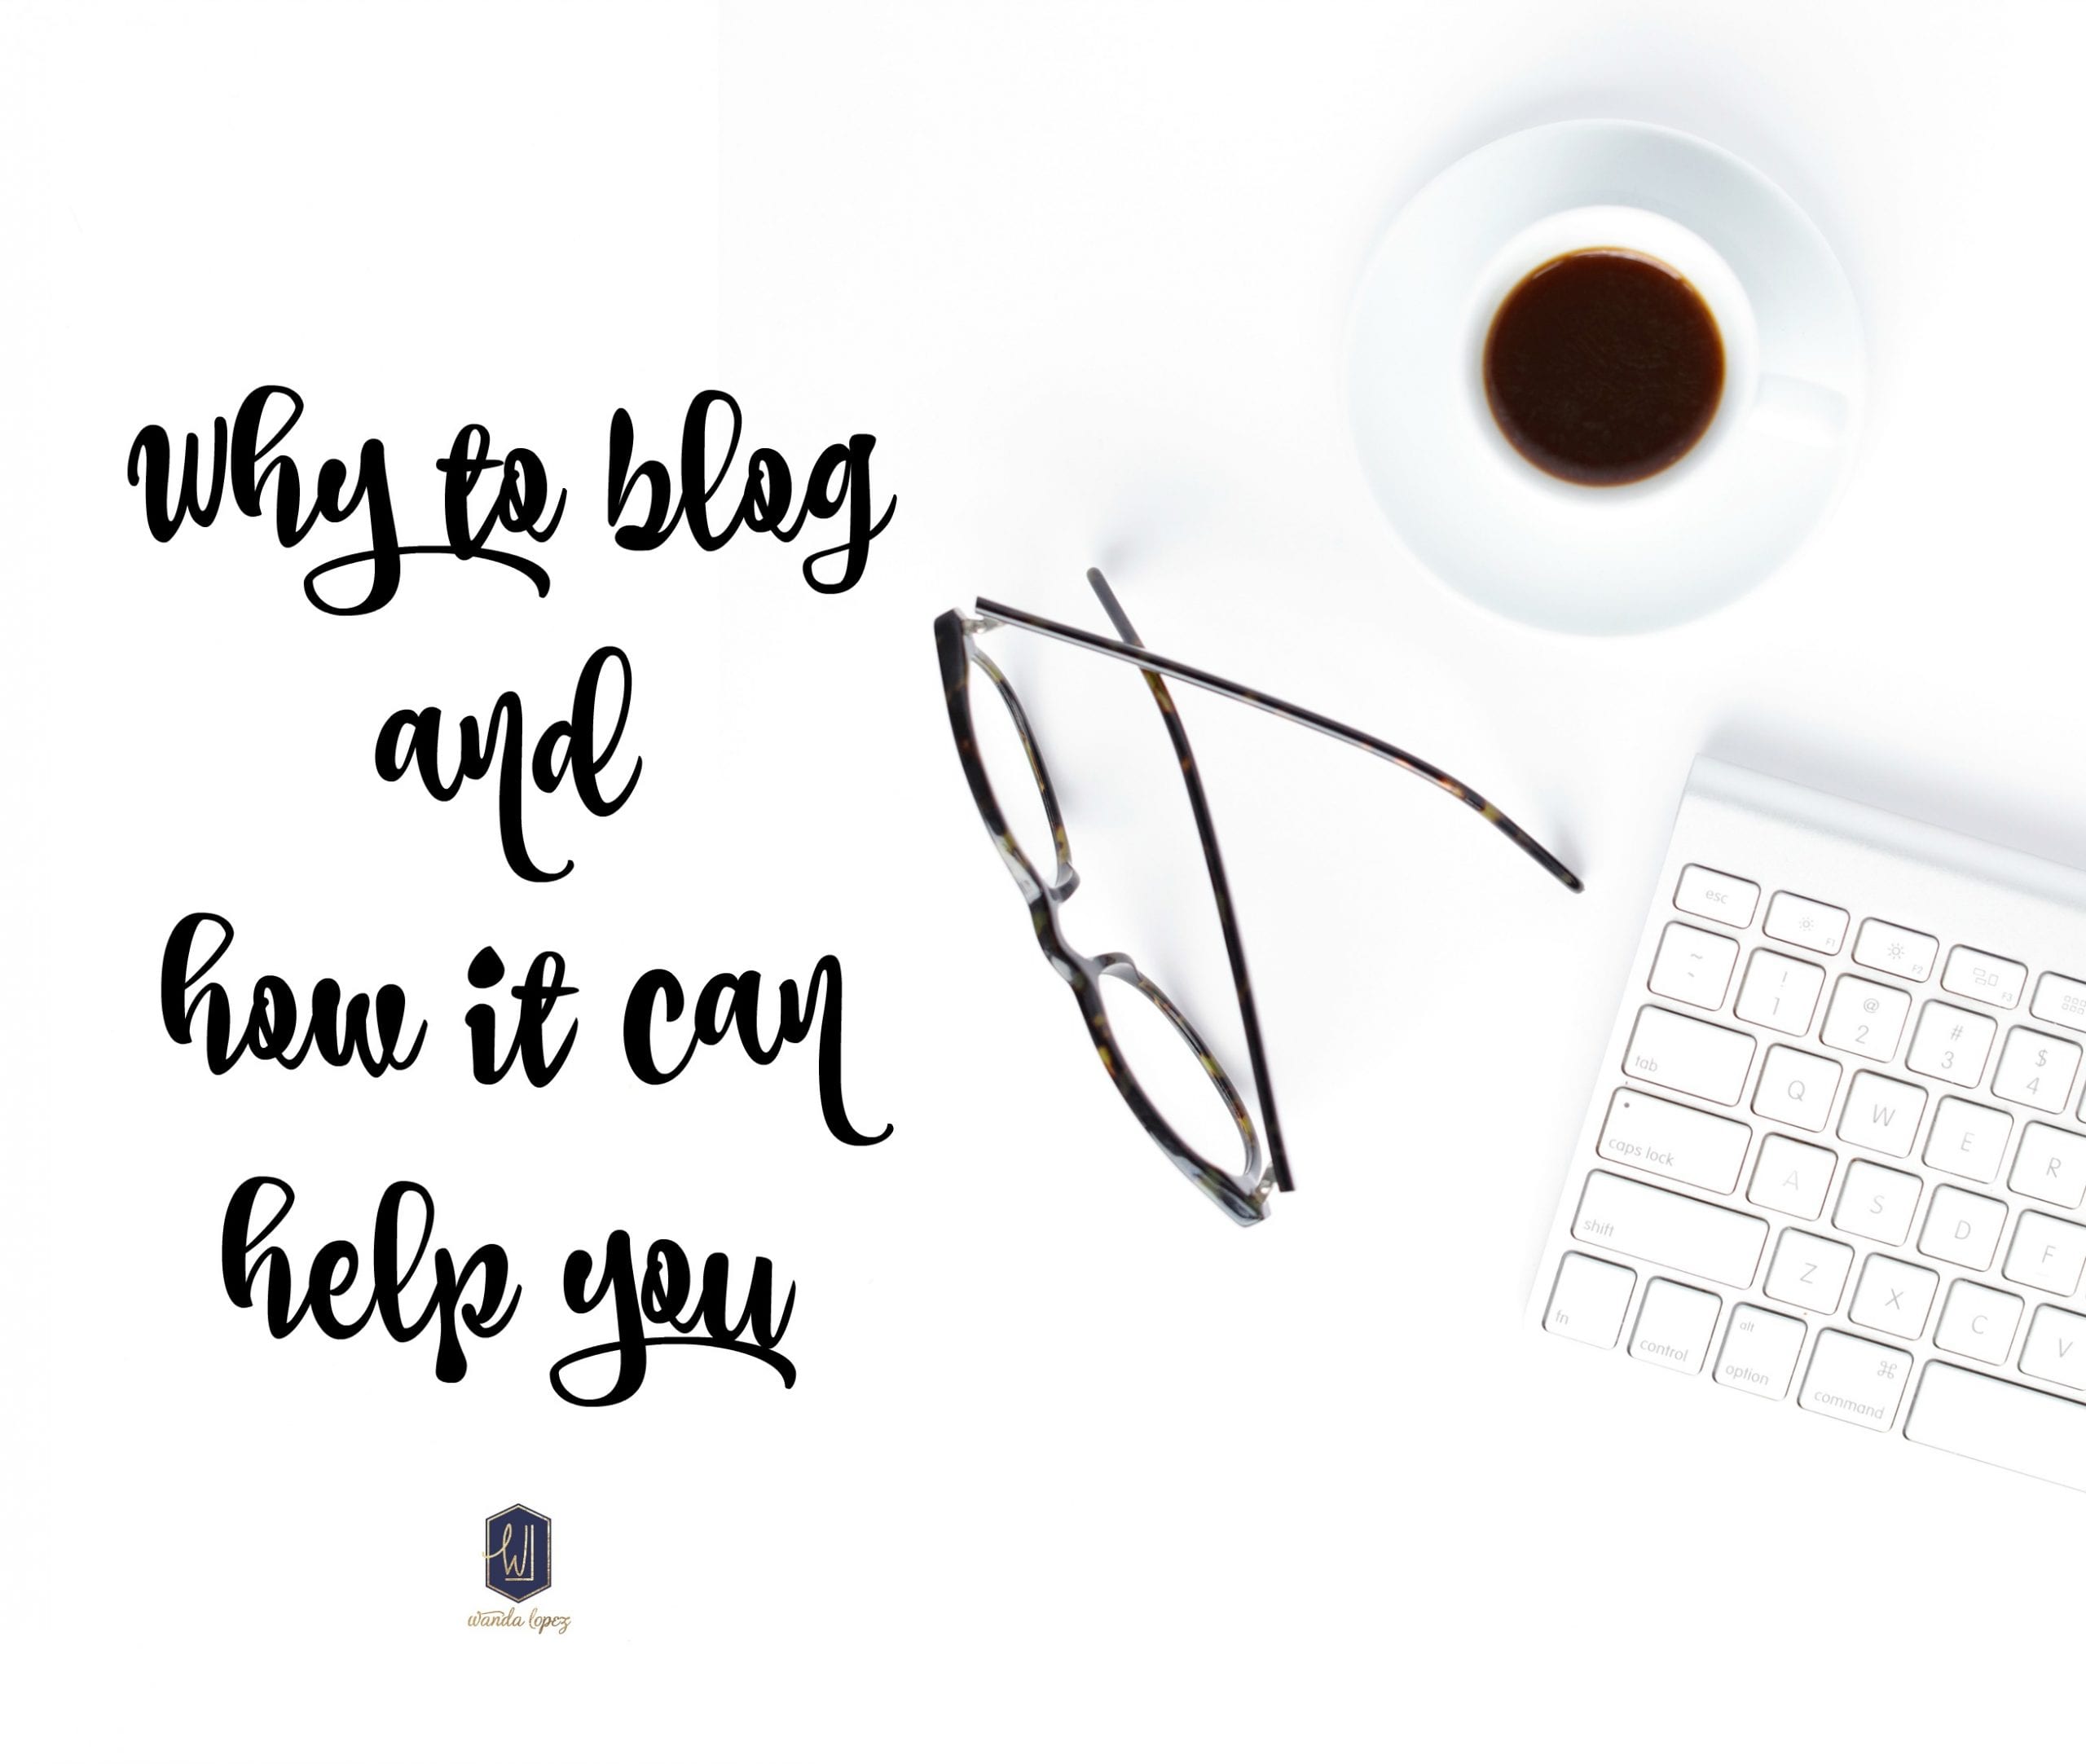 Why_to_blog_and_how_it_can_help_you_2